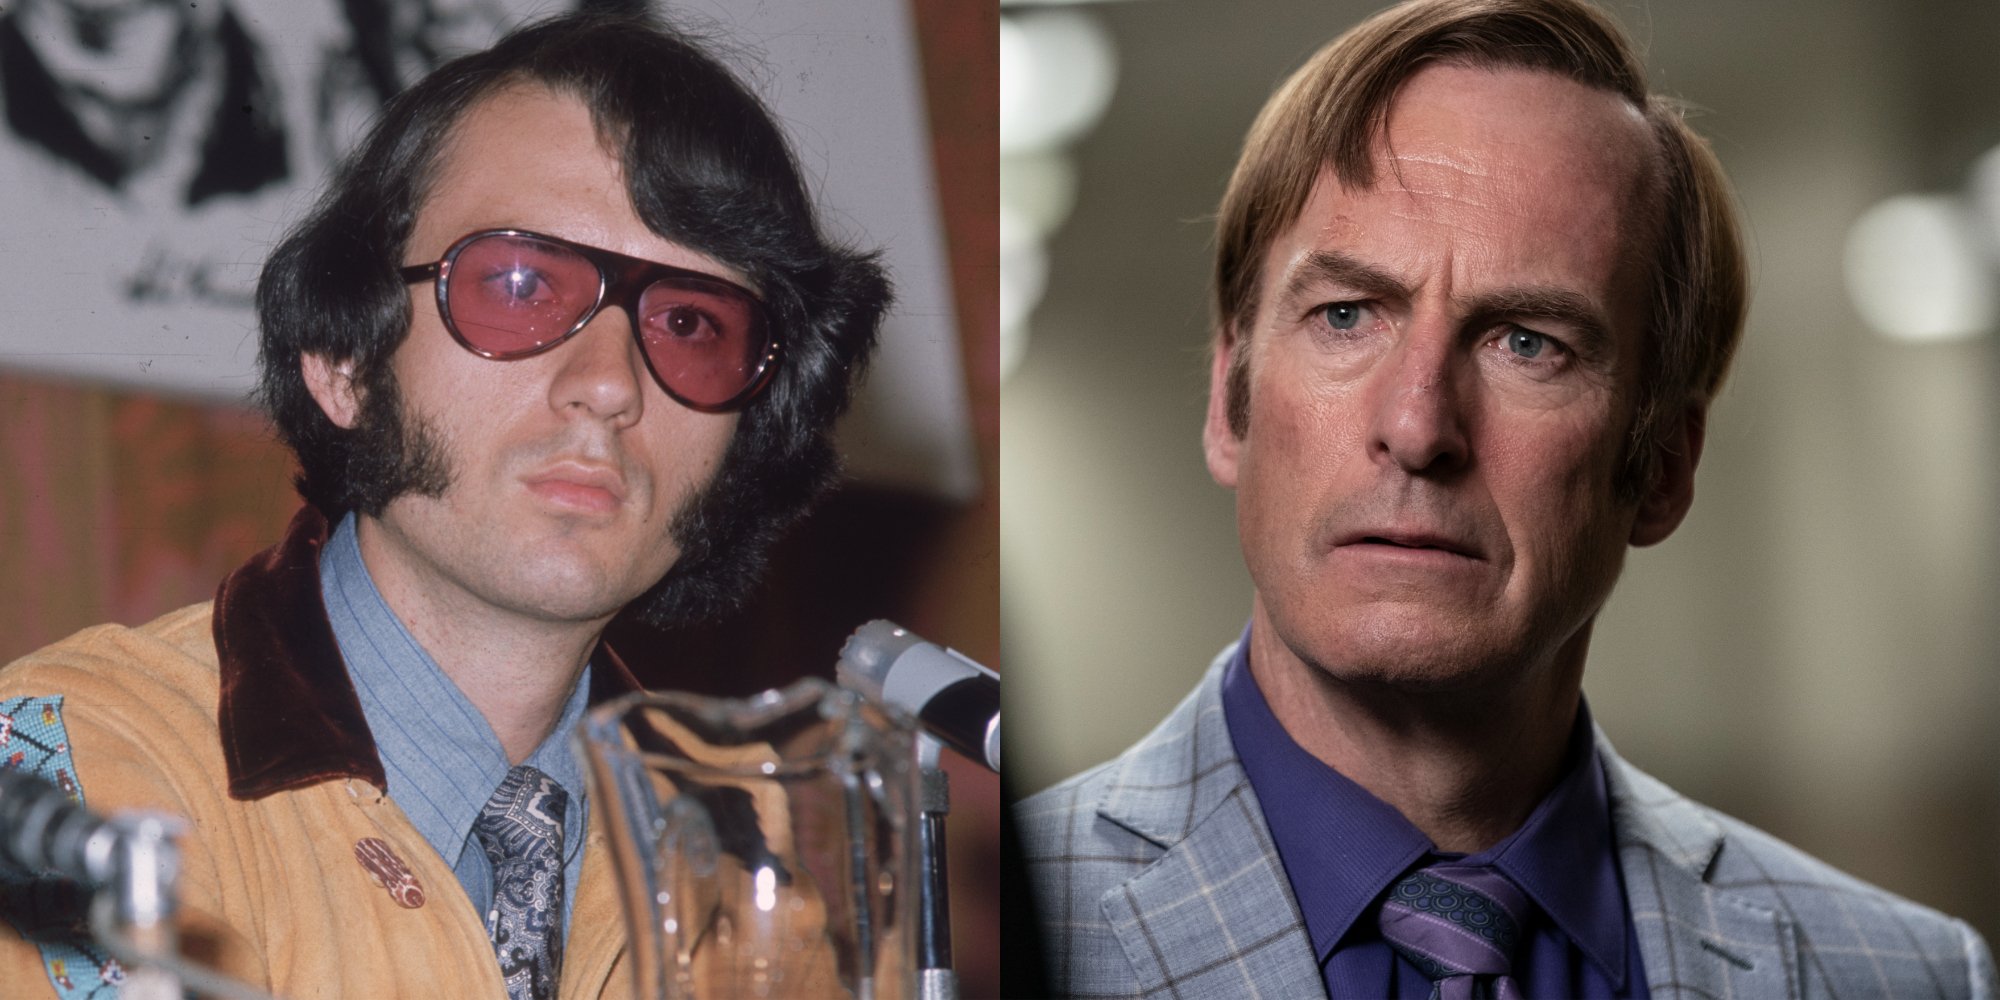 The Monkees Mike Nesmith and 'Better Call Saul' star Bob Odenkirk in side-by-side photographs. Nesmith's song 'Tapioca Tundra' appeared on the series.